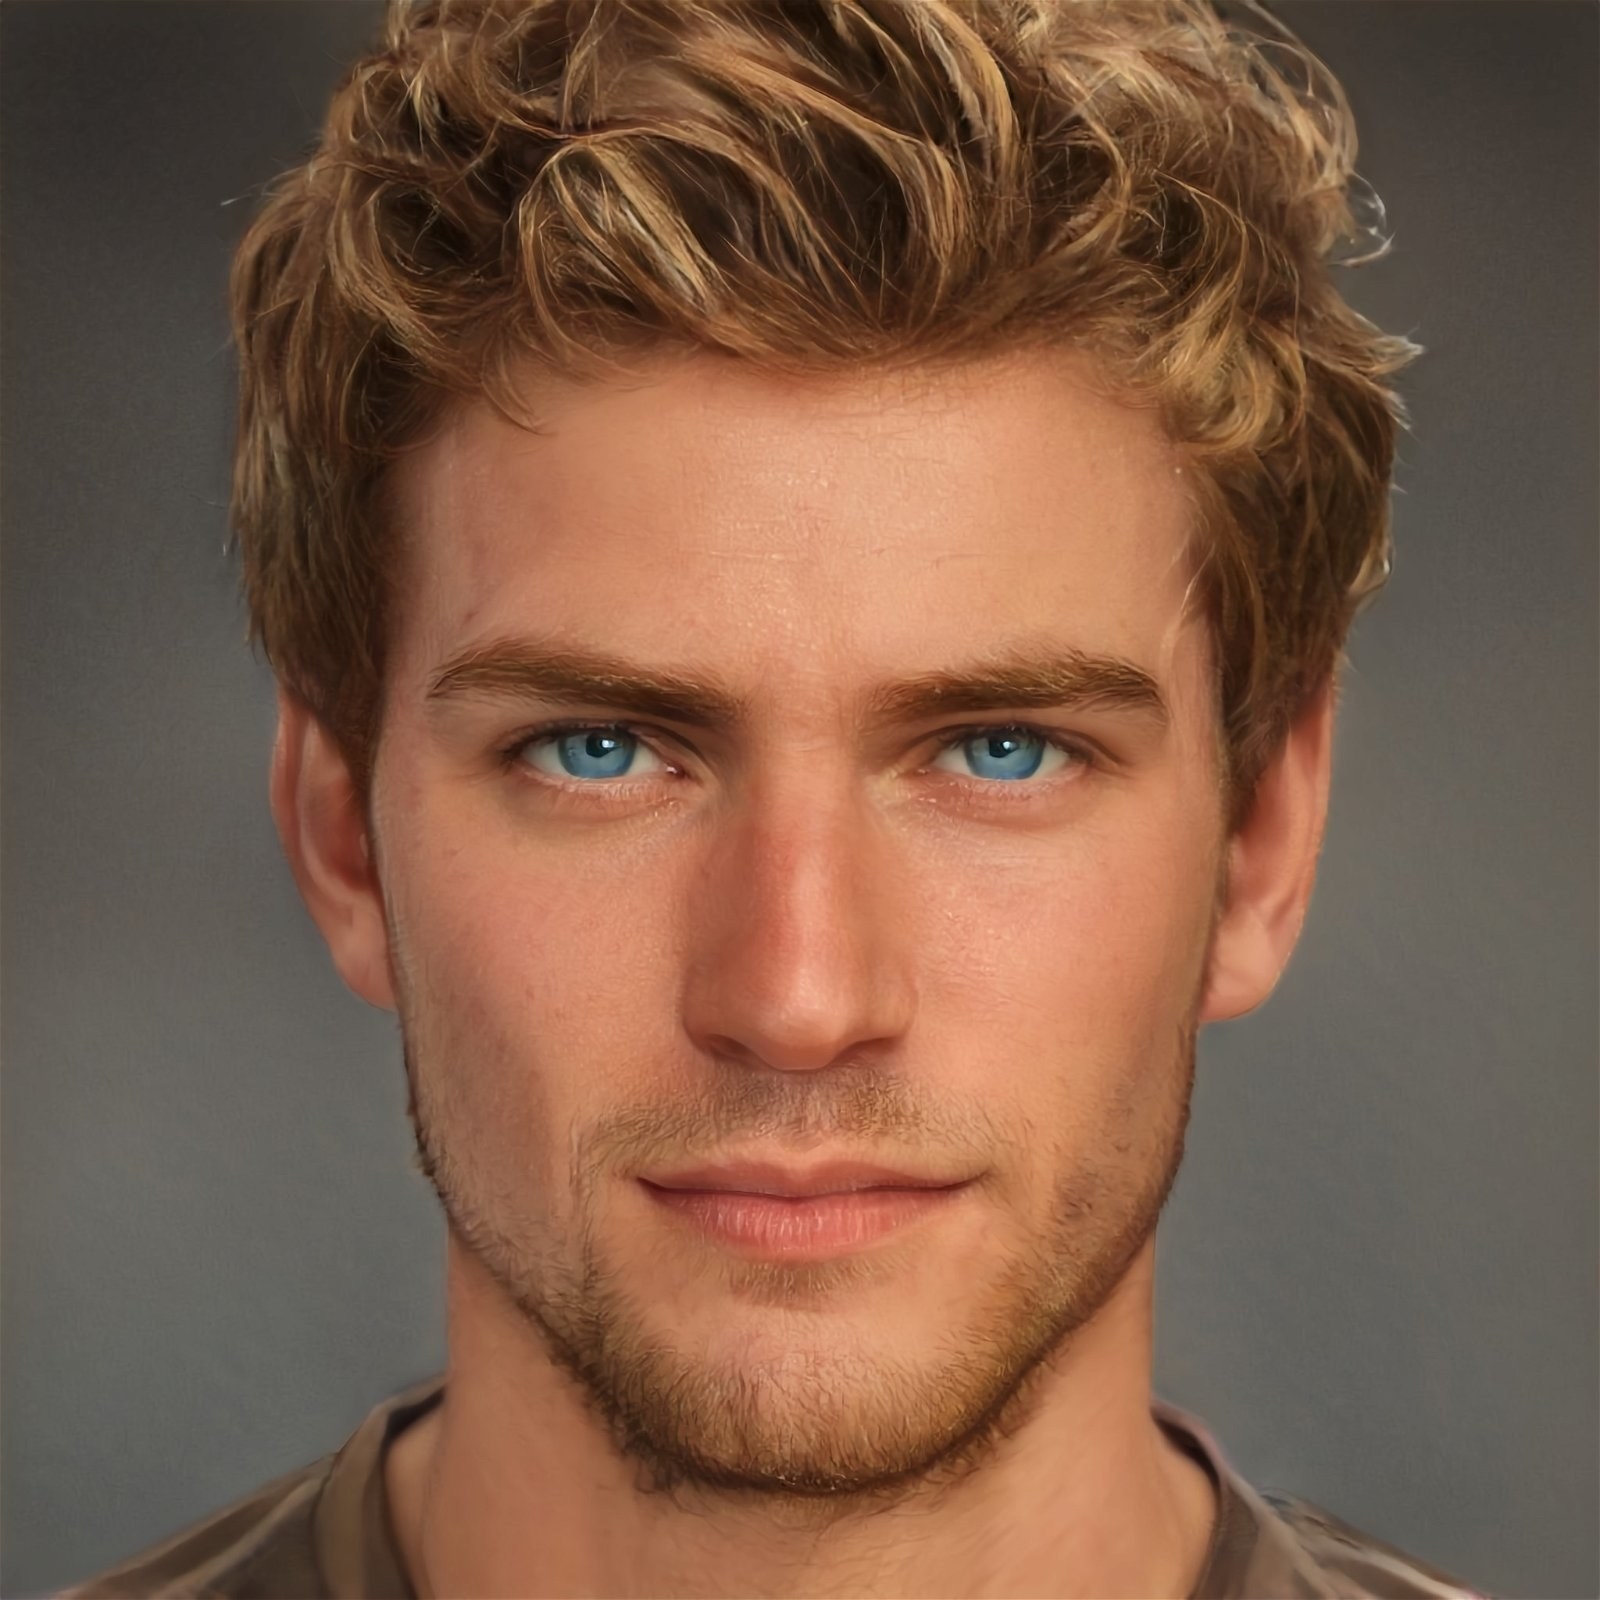 a guy with dark blonde hair and blue eyes